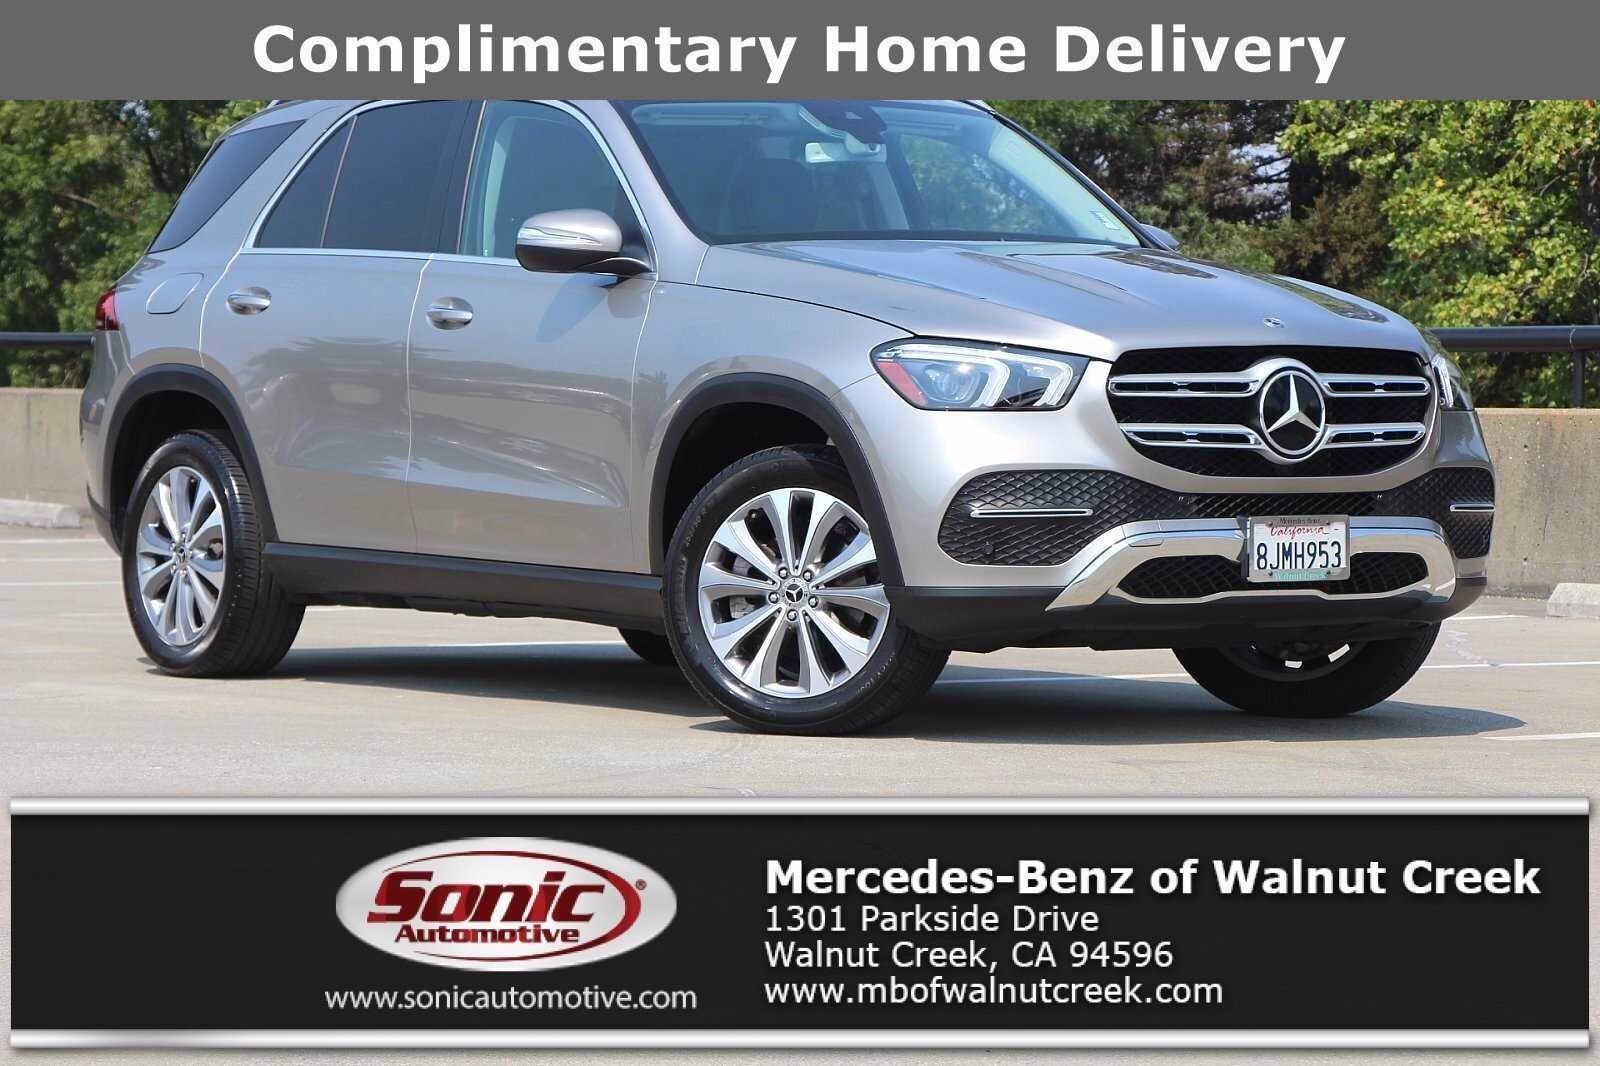 Used 2020 Mercedes-Benz GLE